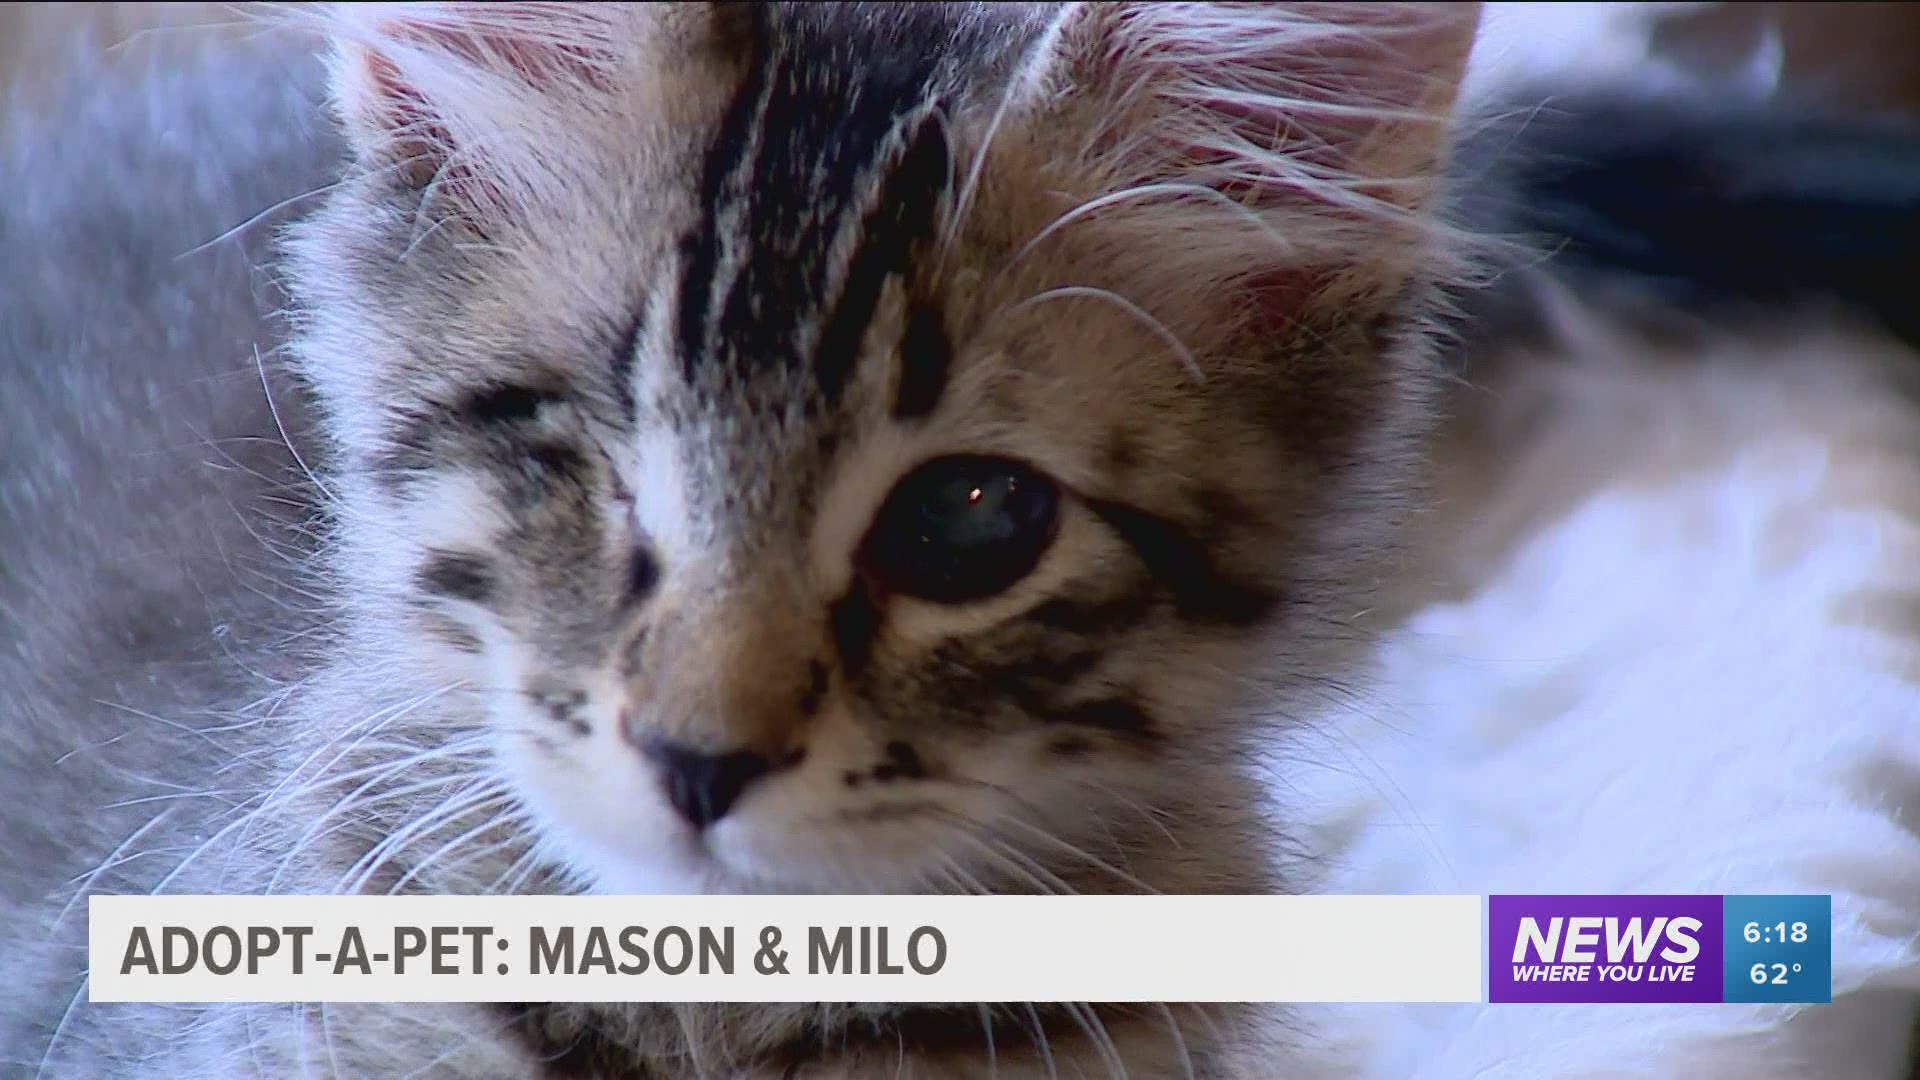 Milo and Mason, along with about 80 other cats and kittens, are available for adoption at Mew Cat Rescue in Bentonville.